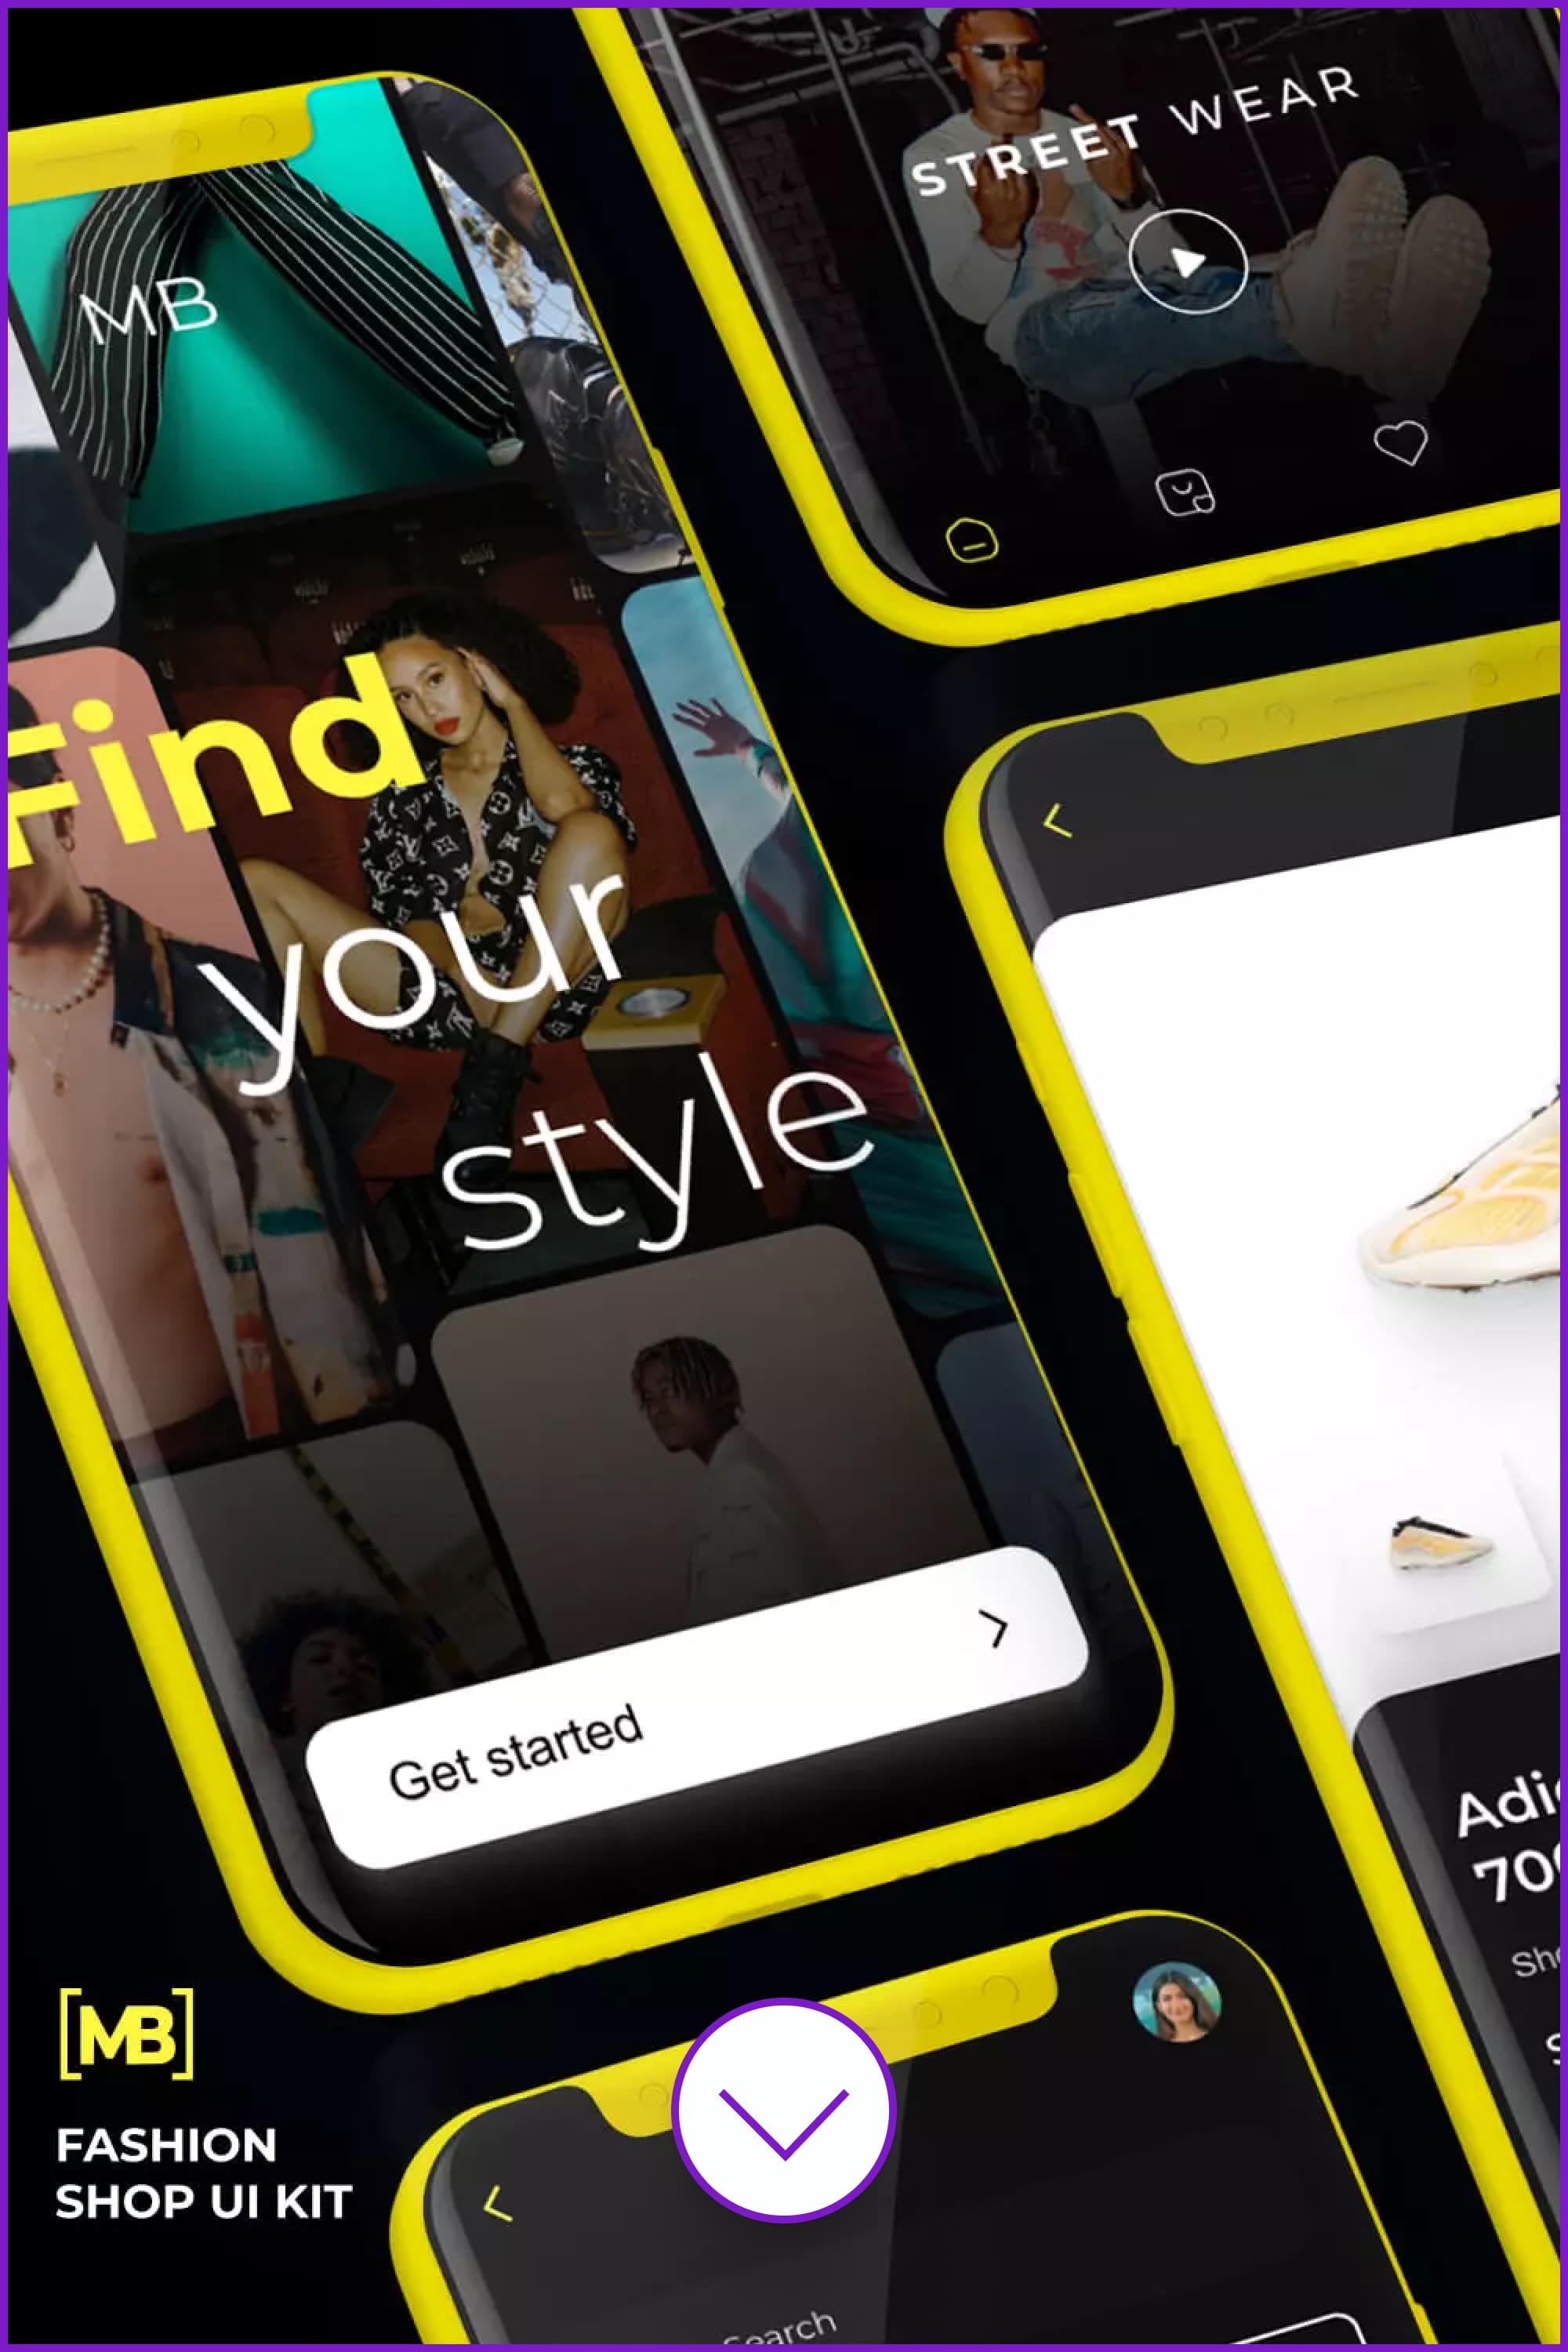 Screenshots of fashion app with dark and bright yellow color.